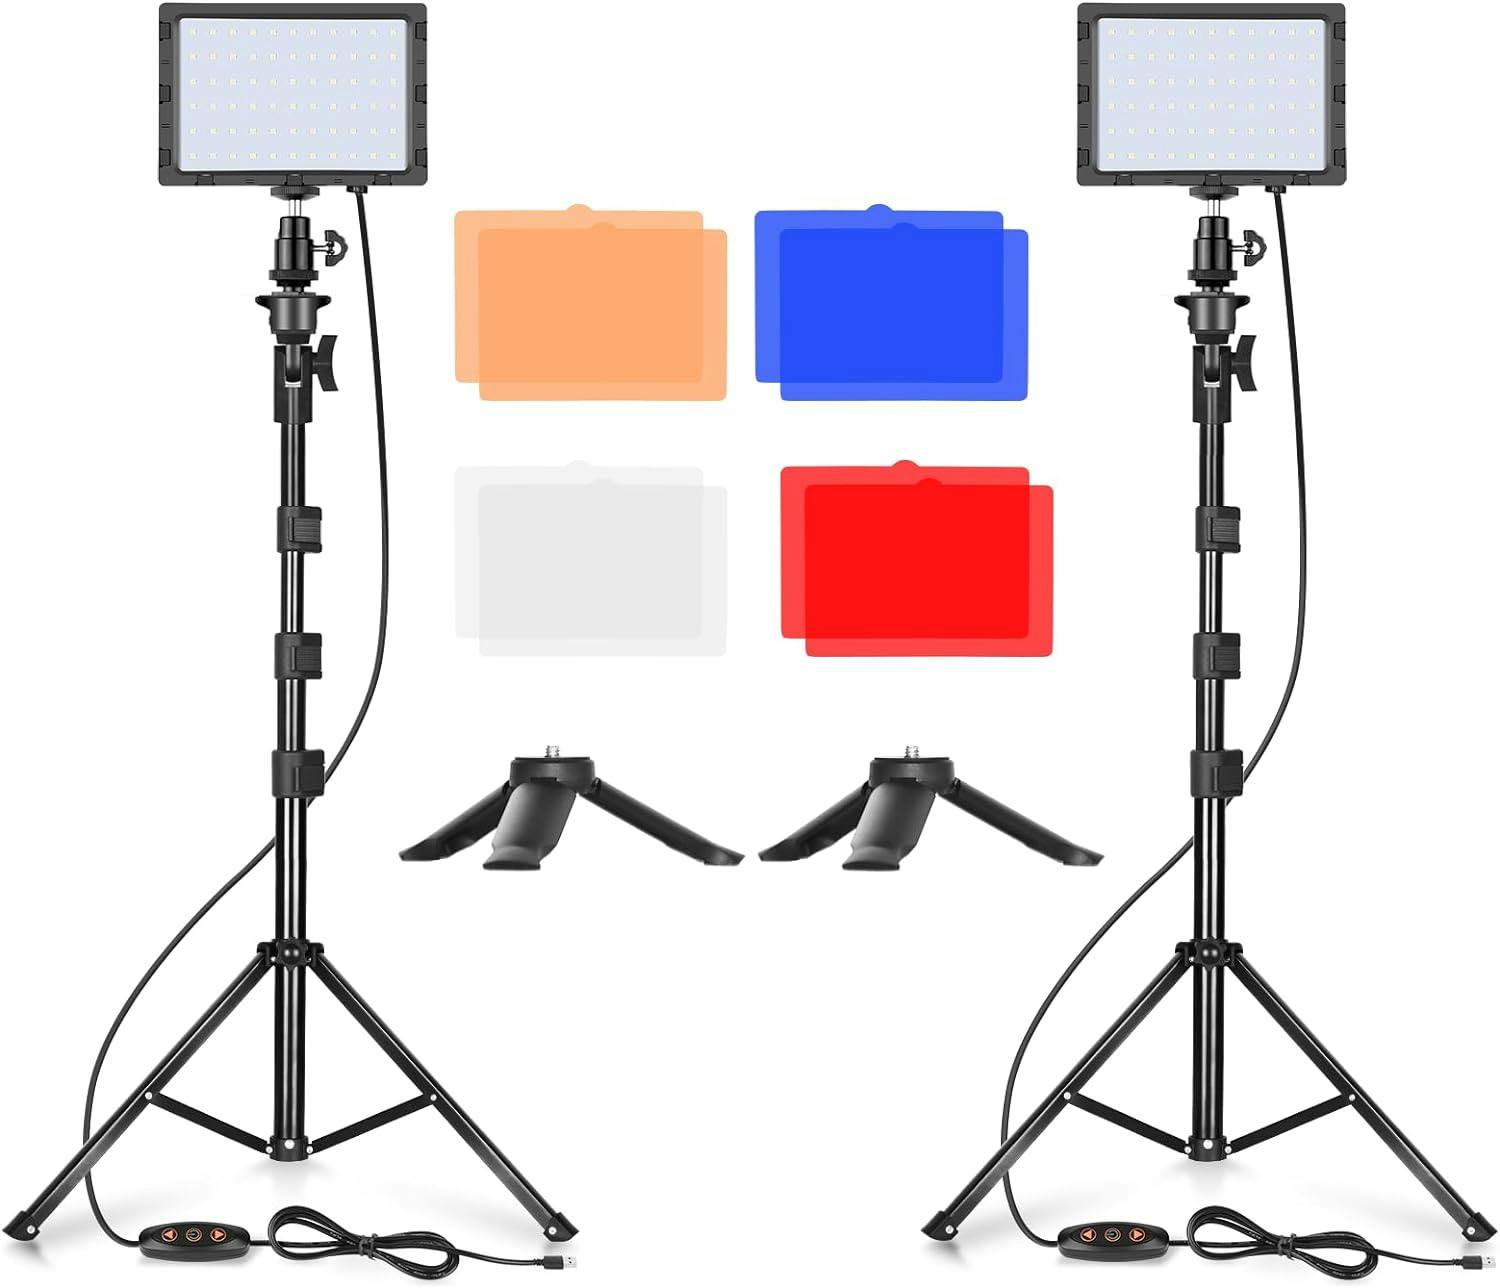 Lumina 54" Adjustable Studio LED Light with Color Filters and Stand